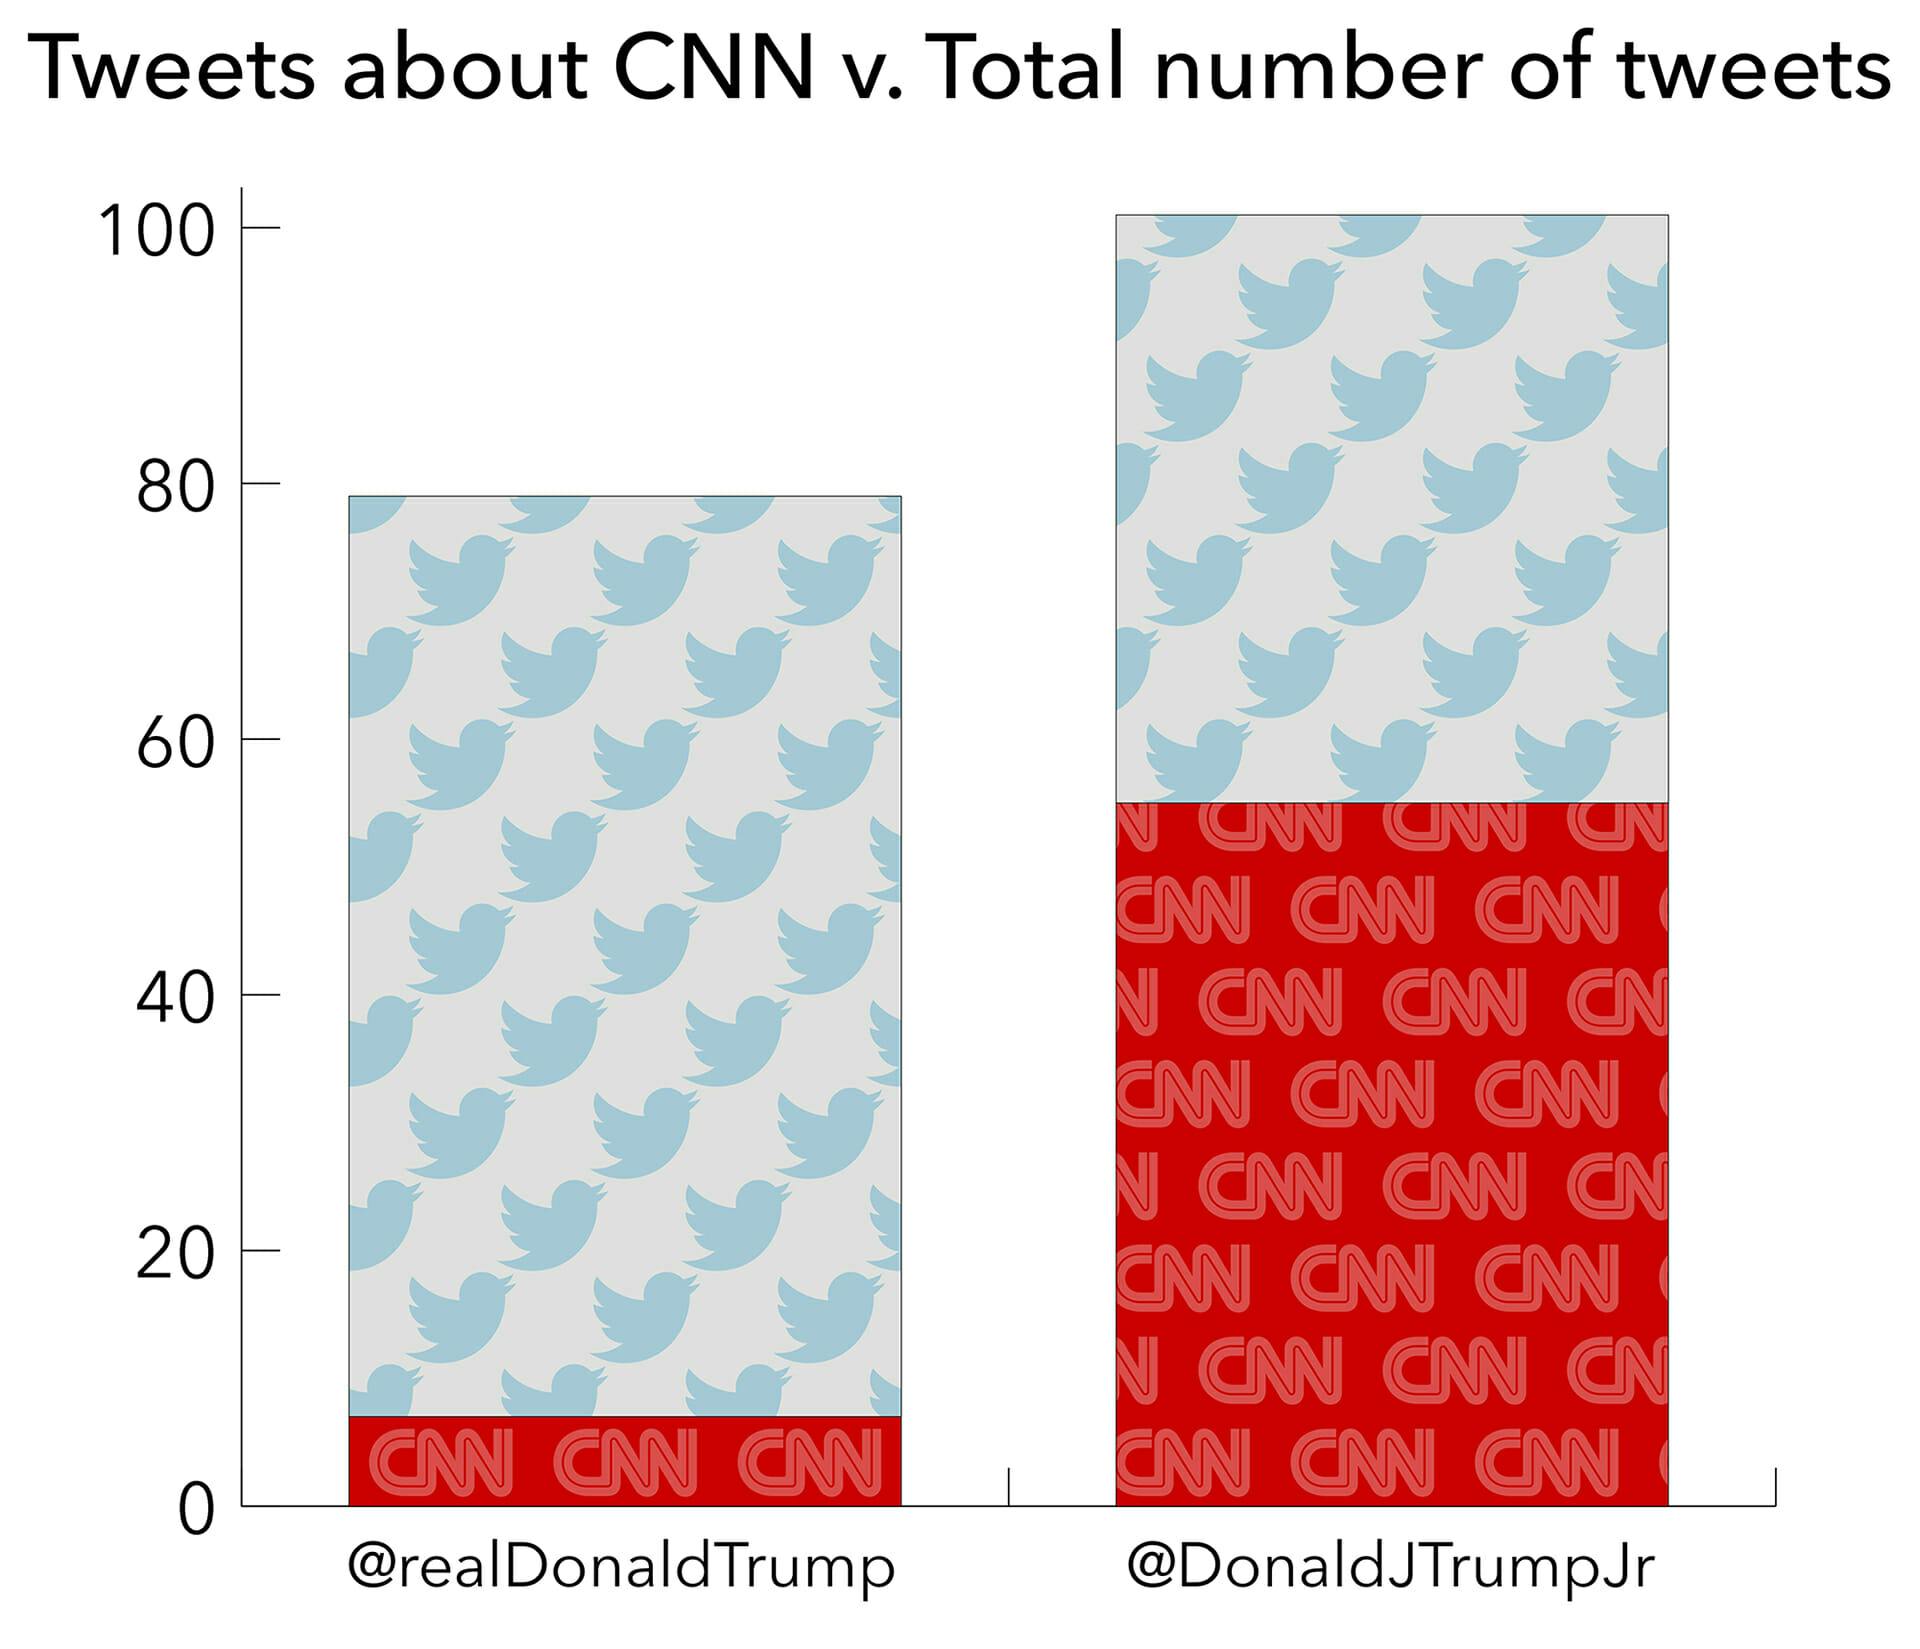 A graph comparing tweets by Donald Trump Jr. and Donald Trump about CNN